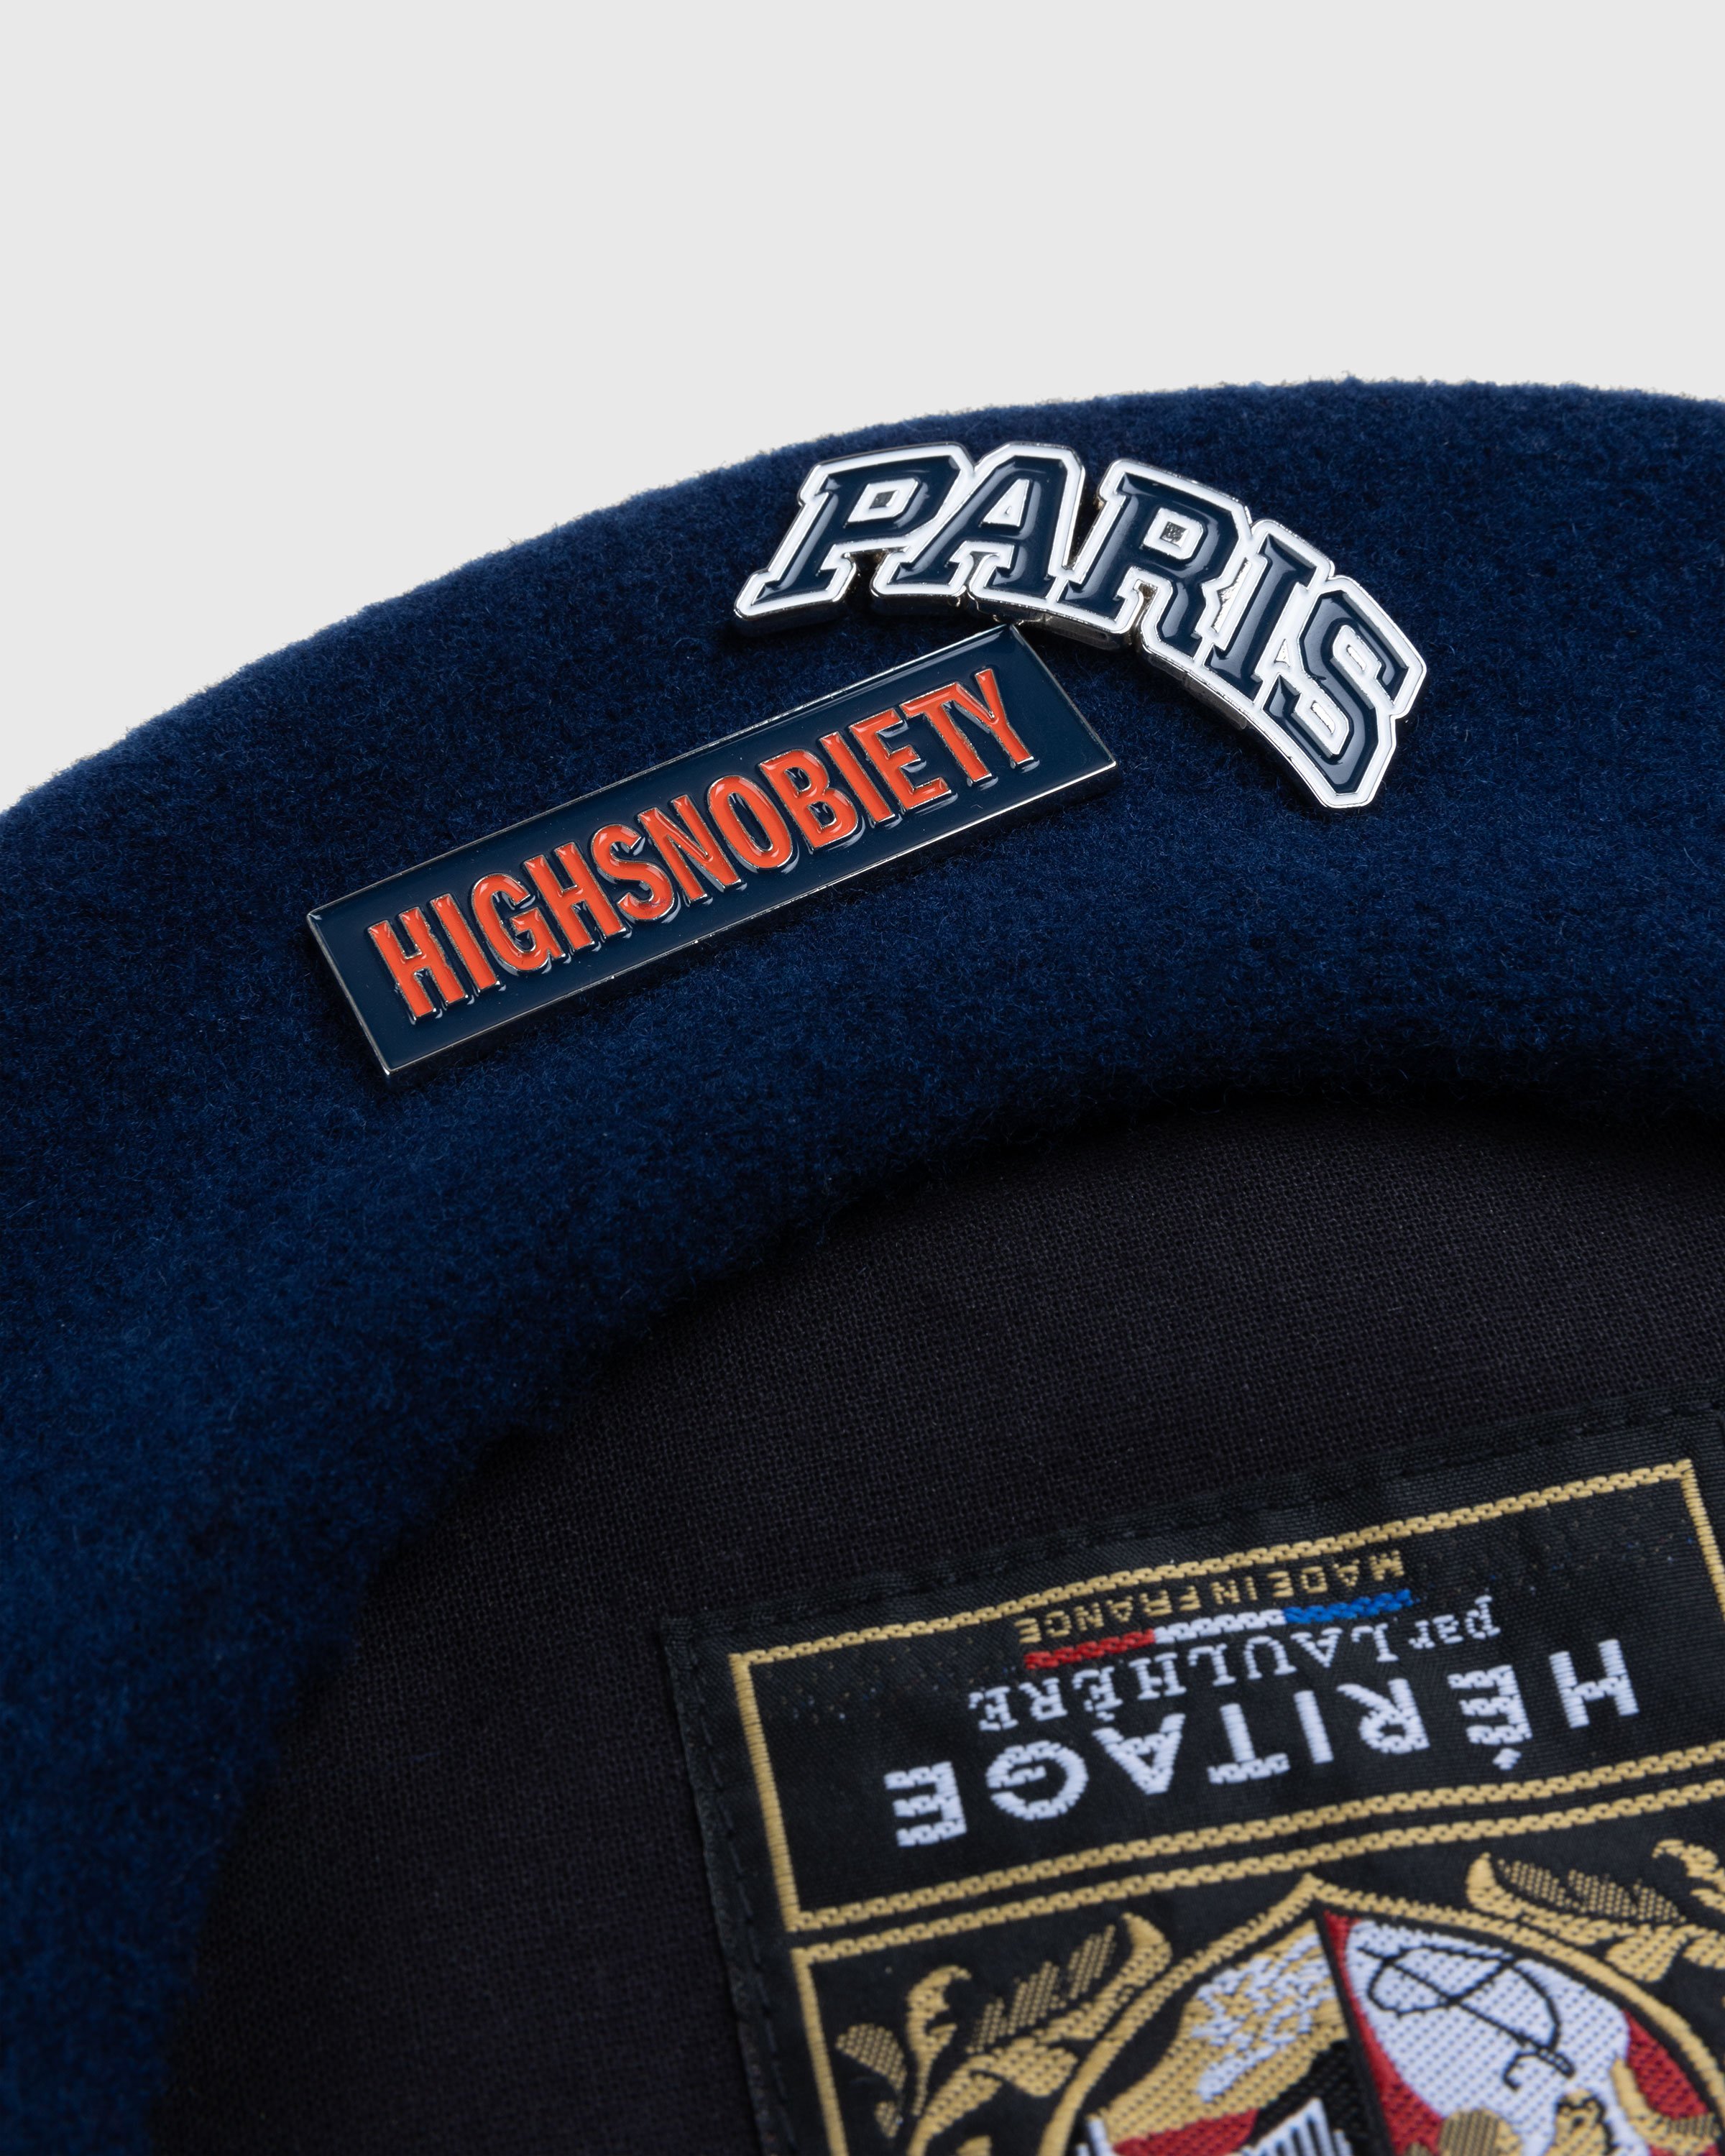 Highsnobiety - Not in Paris 5 Beret with Paris Pins - Accessories - Blue - Image 5